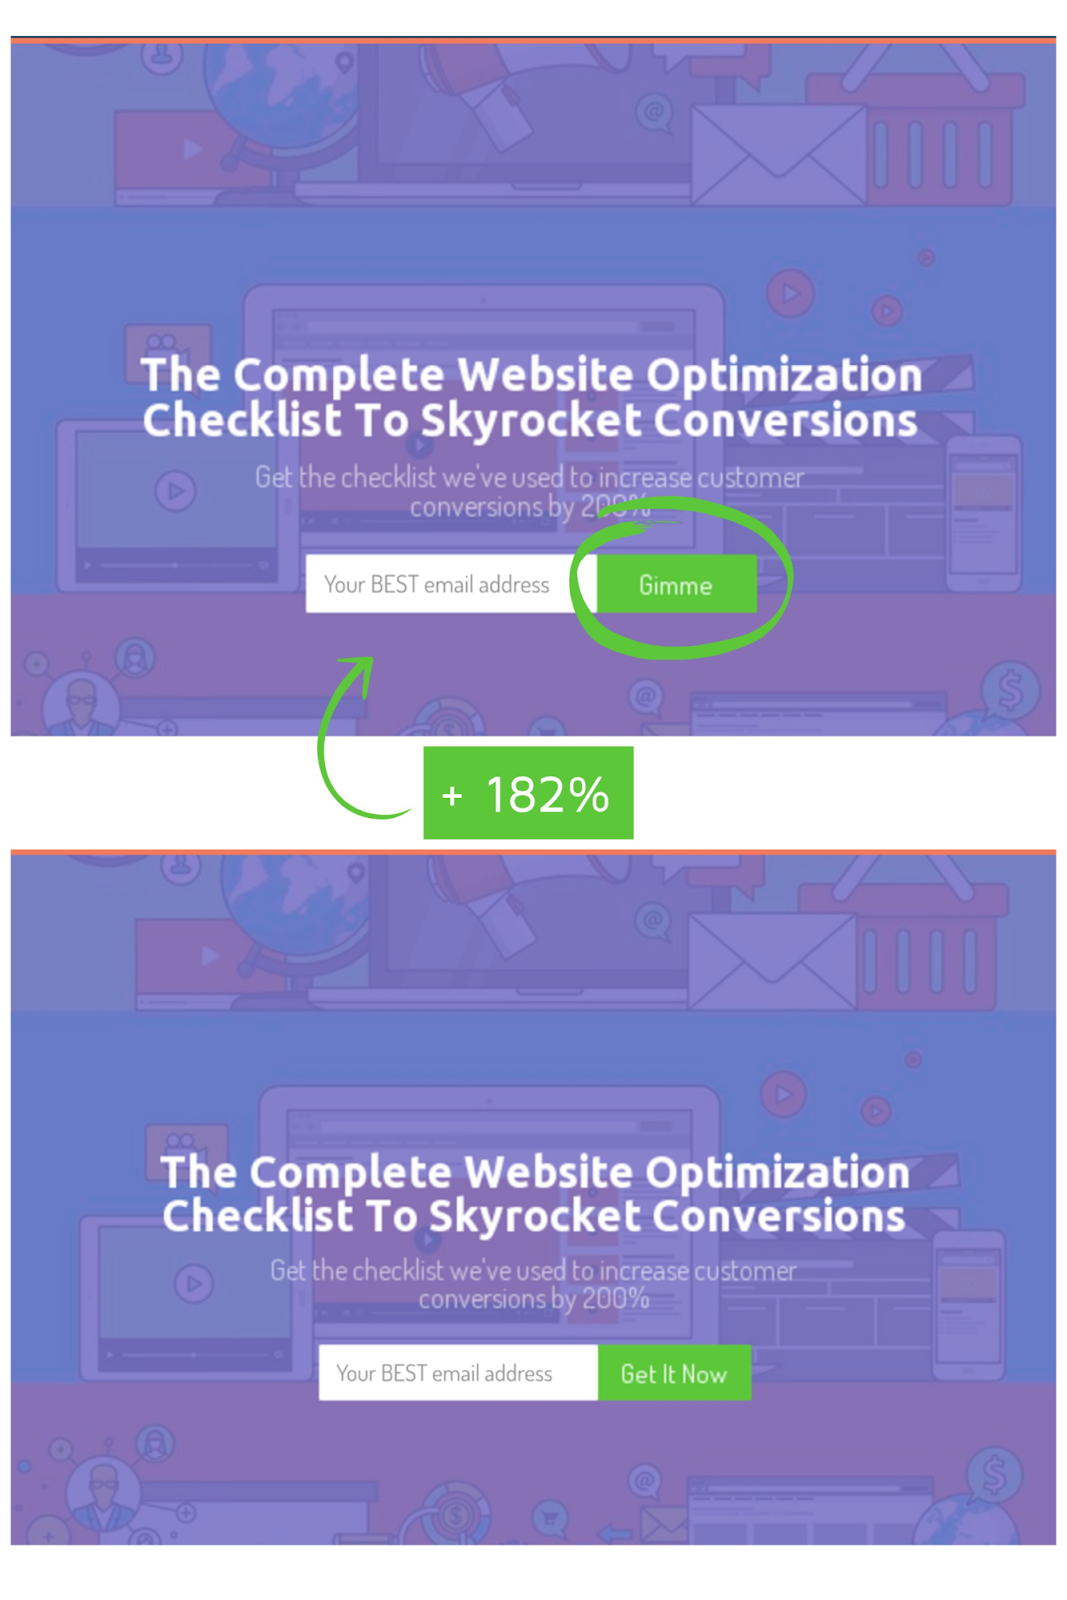 Screenshot showing comparison of different CTA buttons